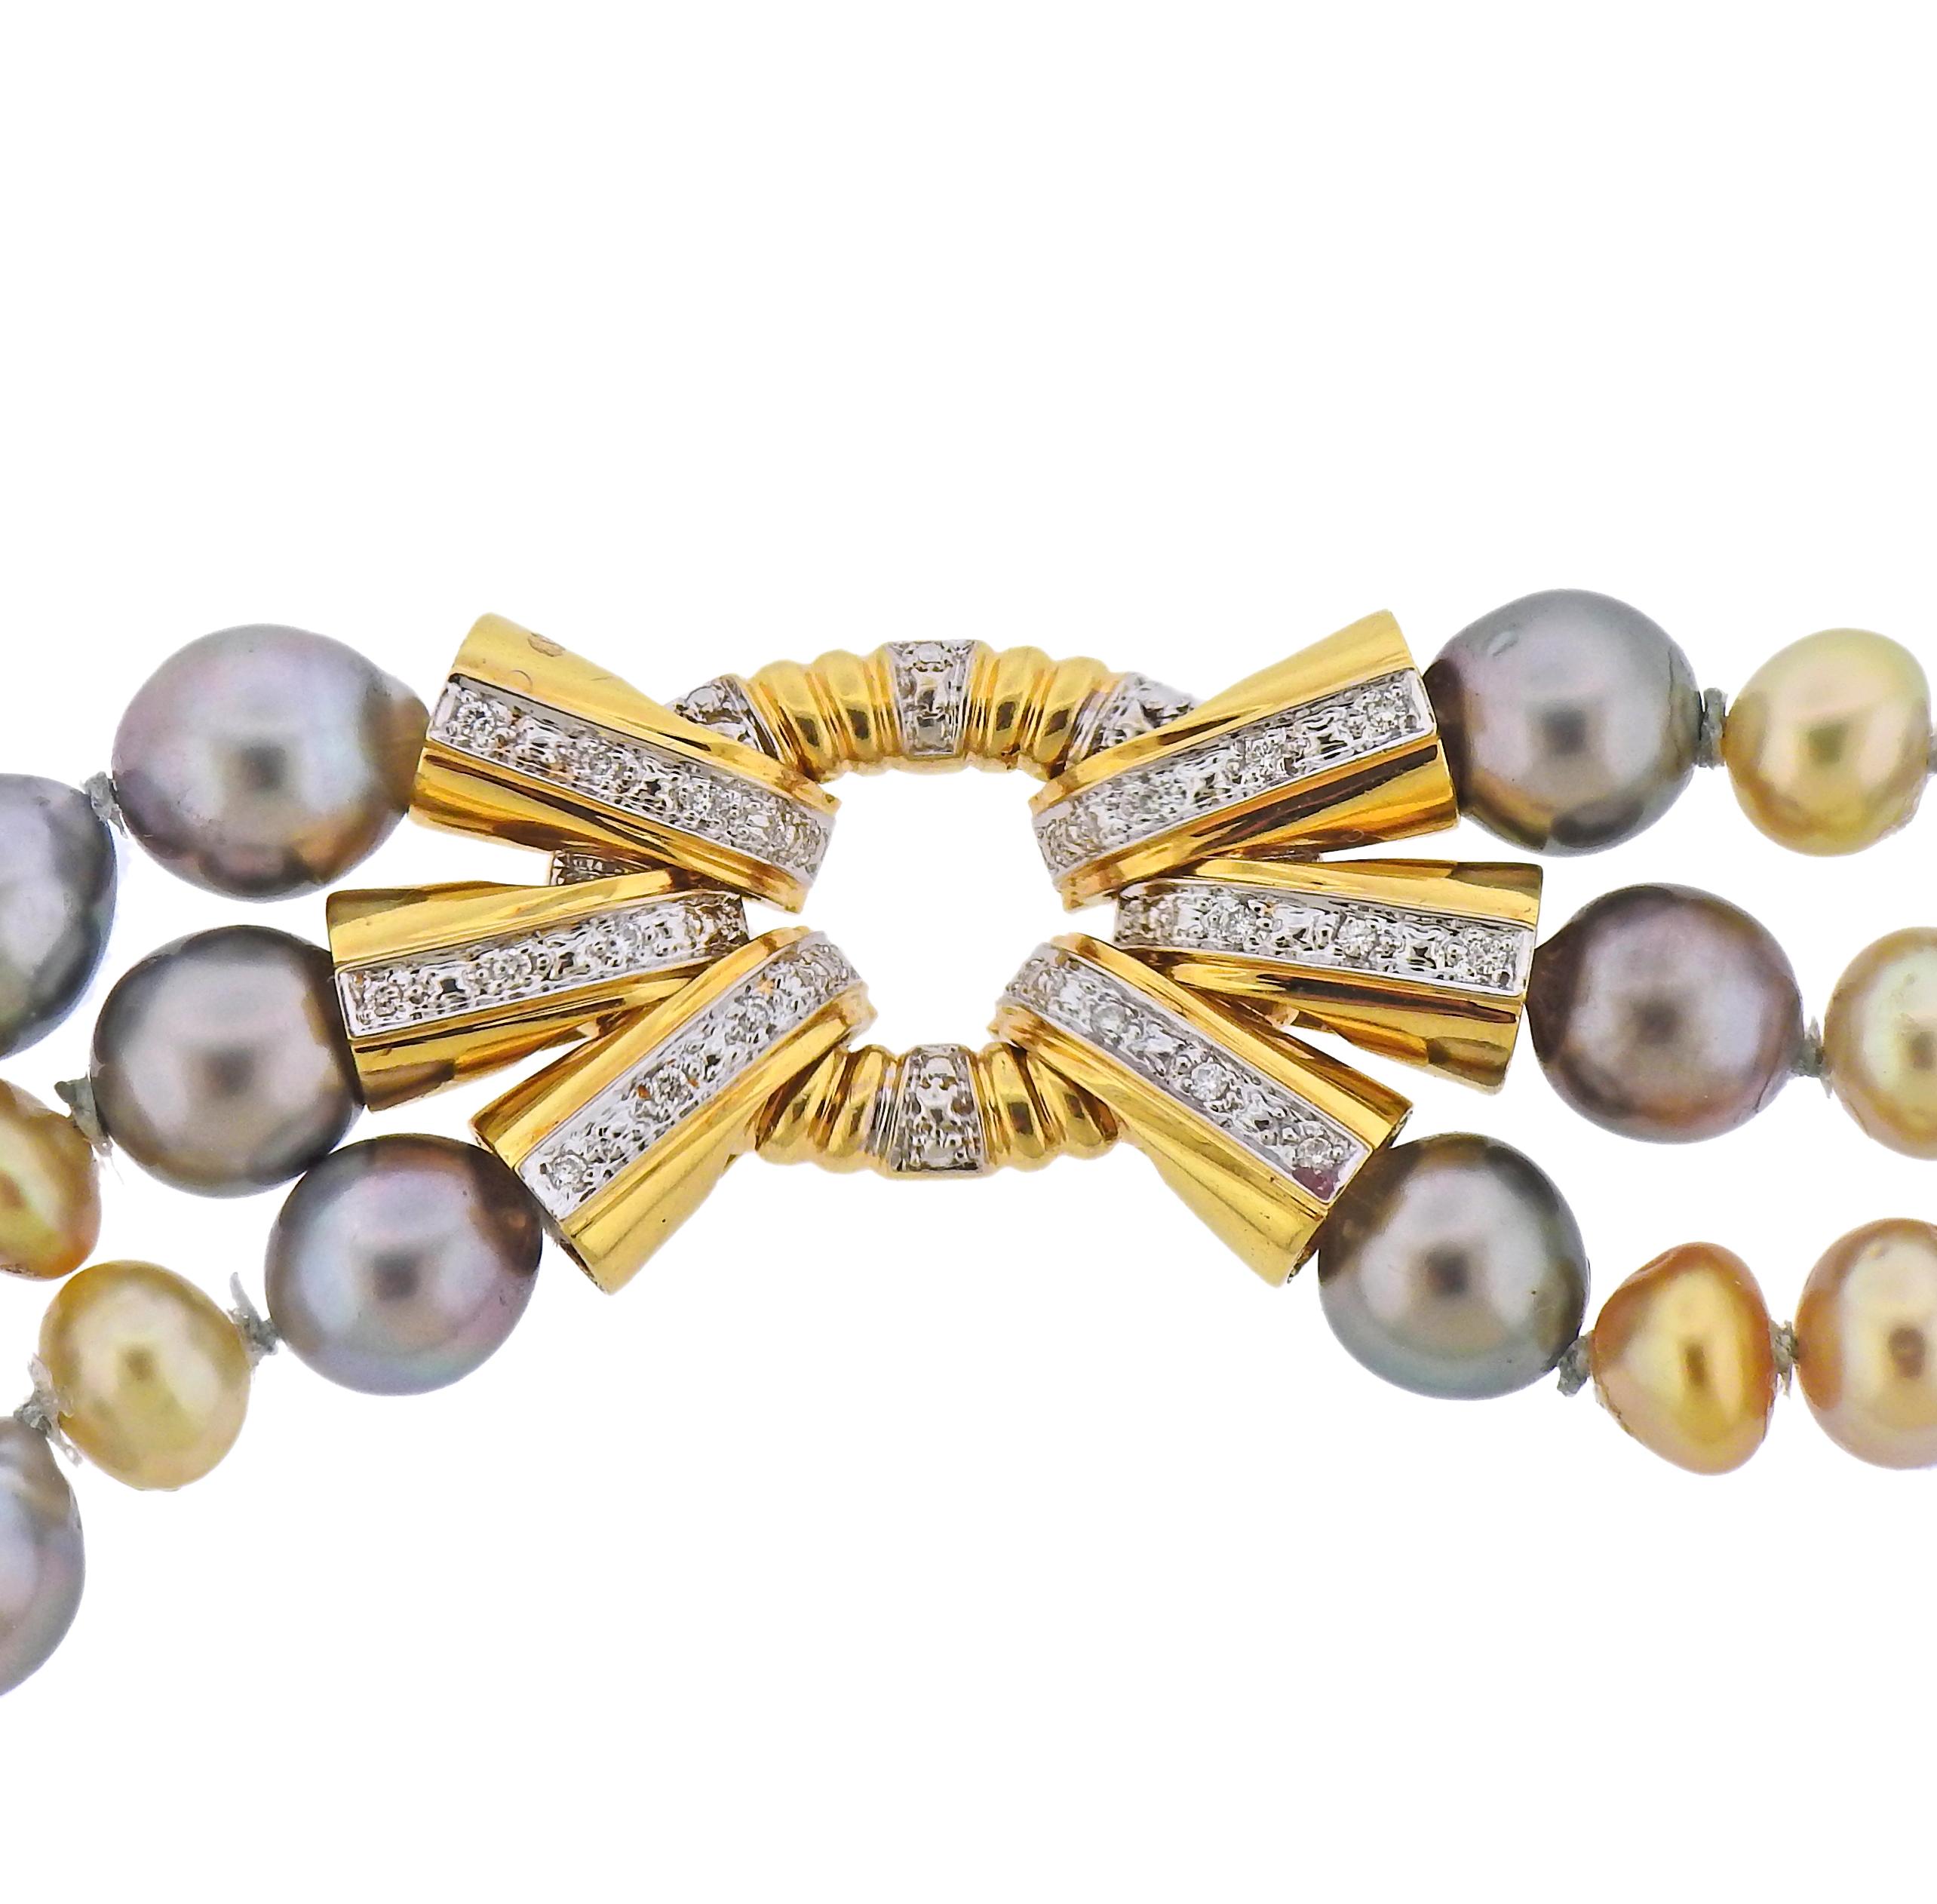 New 3 strand Assael necklace with Keshi Tahitian and Golden pearls - ranging in size from 7 to 11.5mm, and approx. 0.15ctw in G/VS diamonds. Retail $16500, comes with pouch.  Necklace is 17